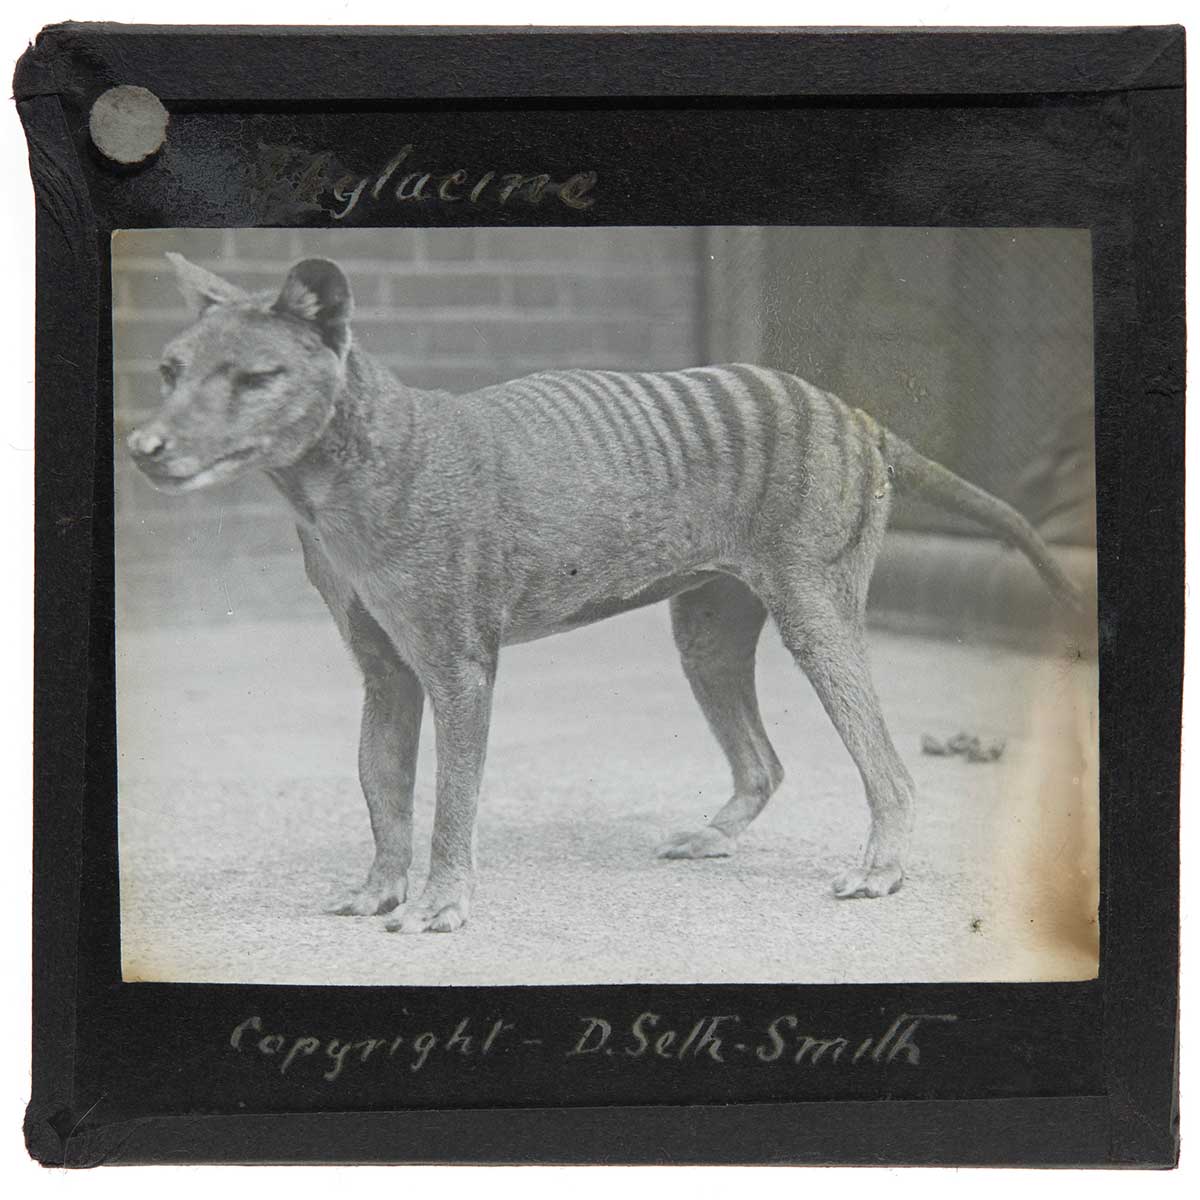 Black and white photo of thylacine standing on a bare floor with a brick wall in the background.